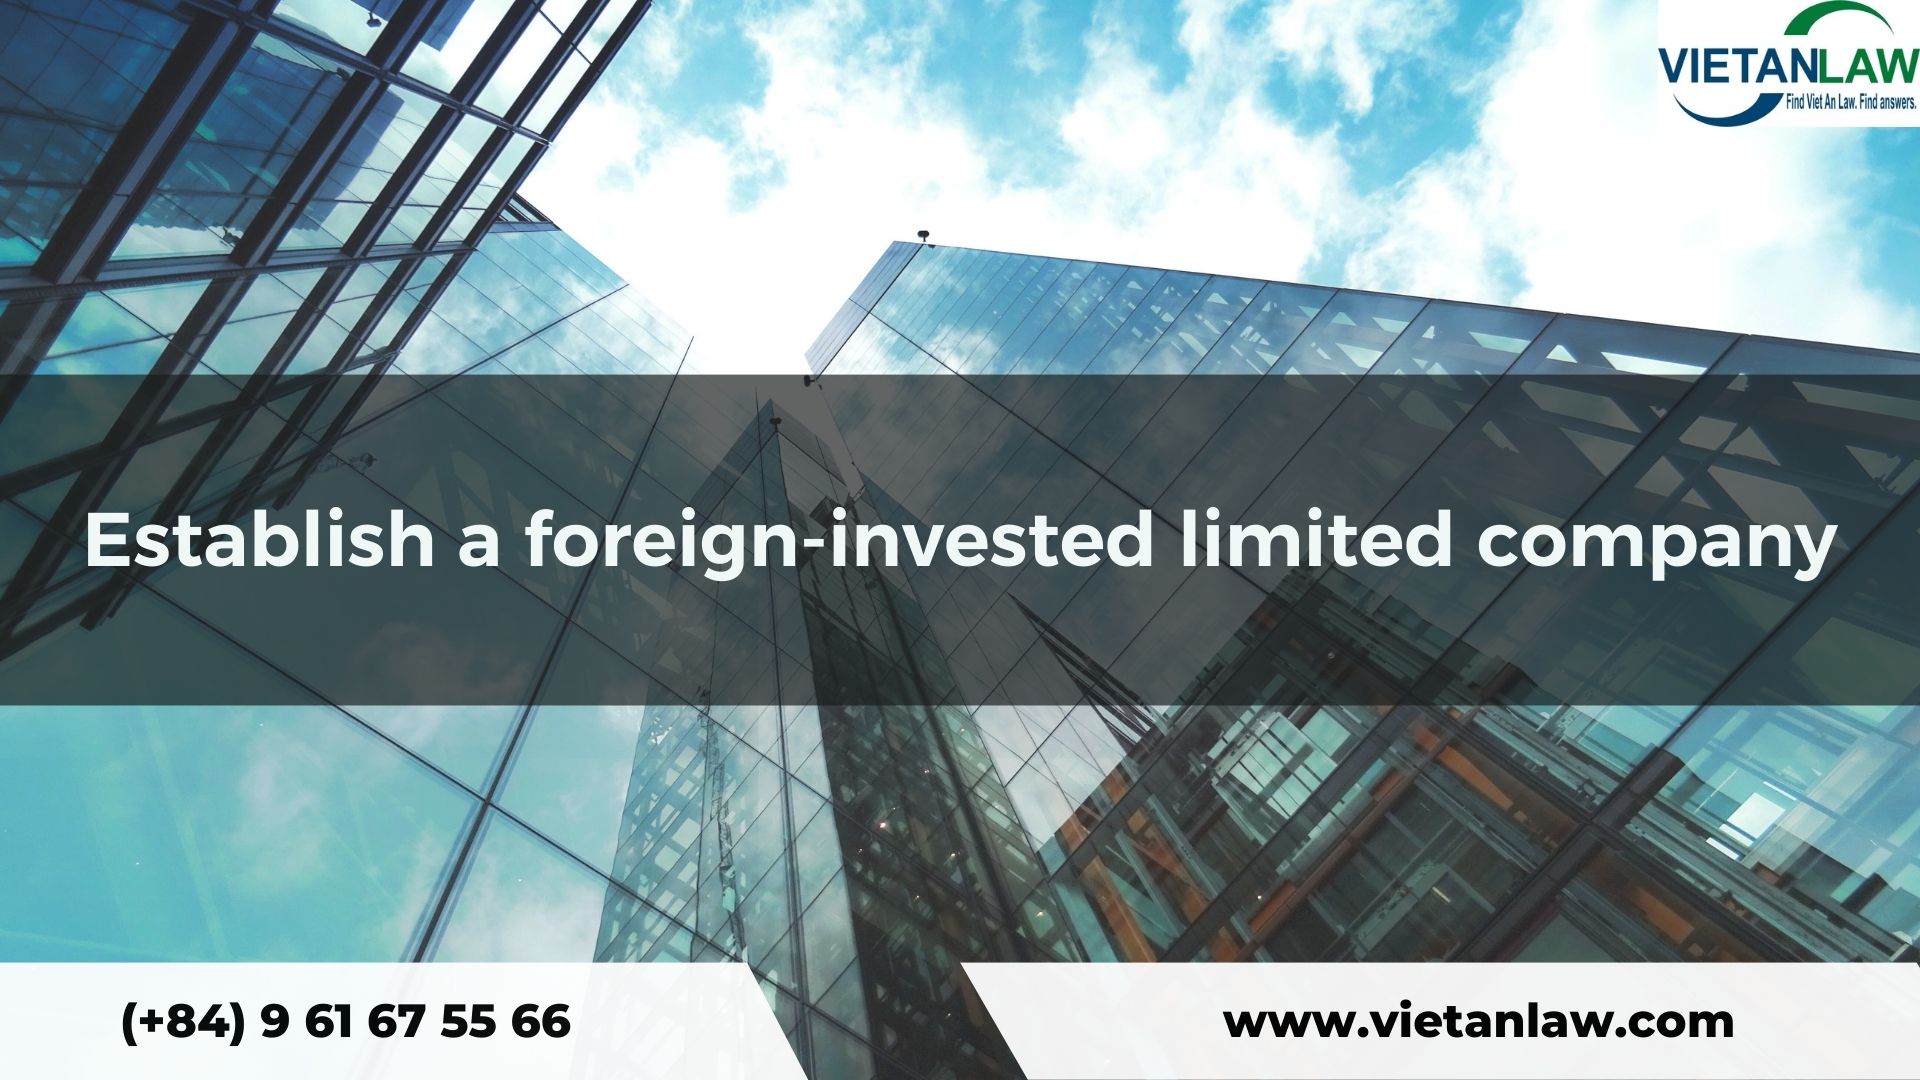 Establish a foreign-invested limited liability company in Vietnam